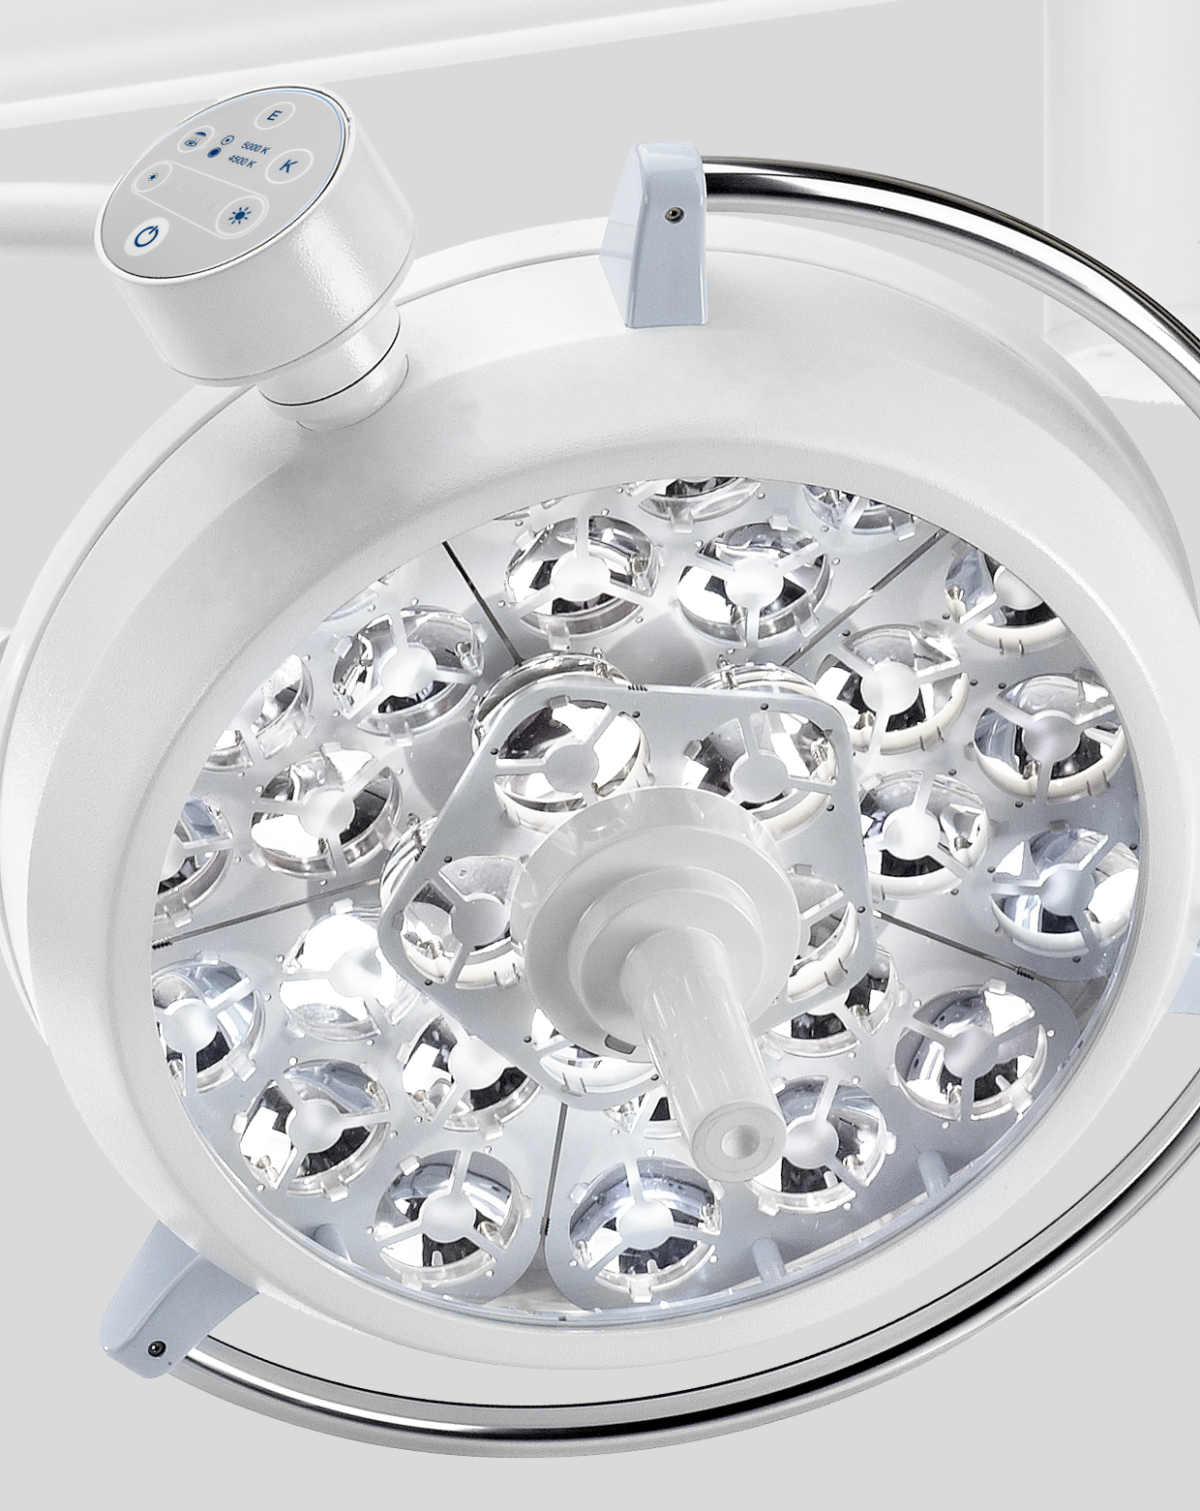 The operating lamps, which are part of the Pentaled N Series, marked a turning point in medical lighting, since they were the first LED surgical lights presented to the public.<br />
The shamanic Pentaled 30N lamp is ideal for maxillofacial surgery and cosmetic surgery. It is particularly suitable in operating rooms where the lamp must be small to avoid interfering with other equipment suspended on the ceiling.